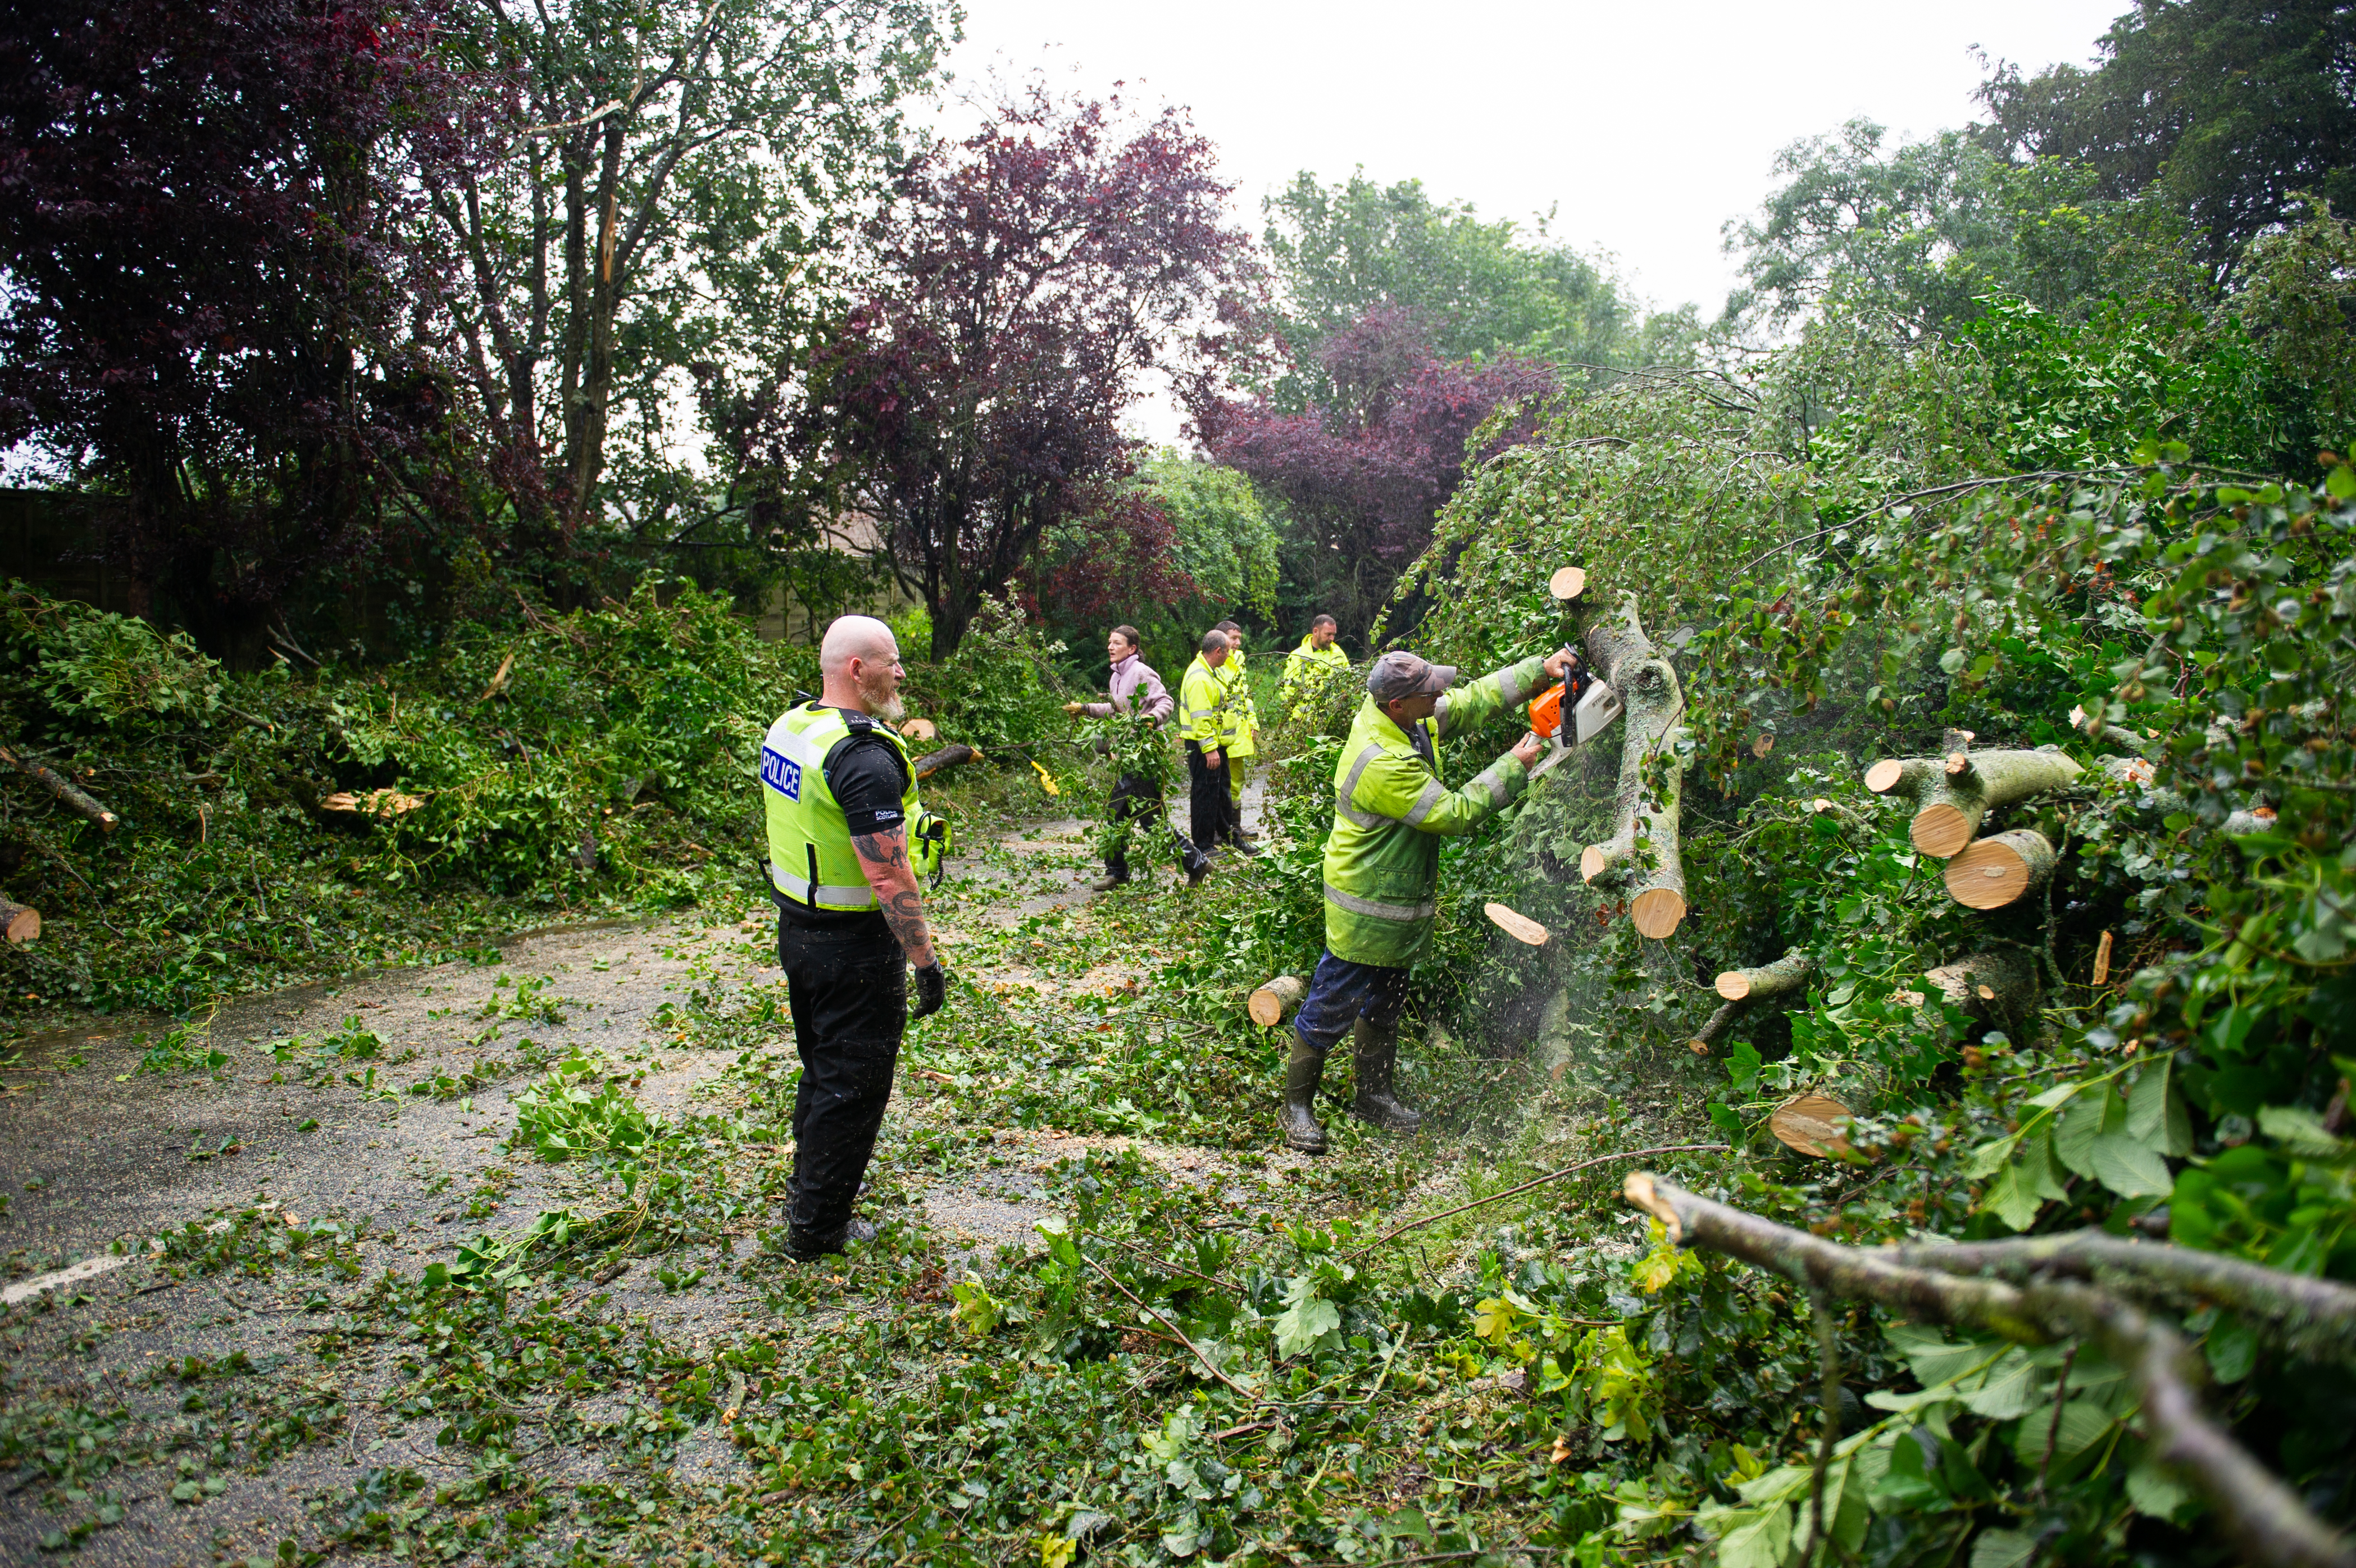 The clear-up operation in full swing following the tree which fell across the A932 near Pitmuies Gardens.